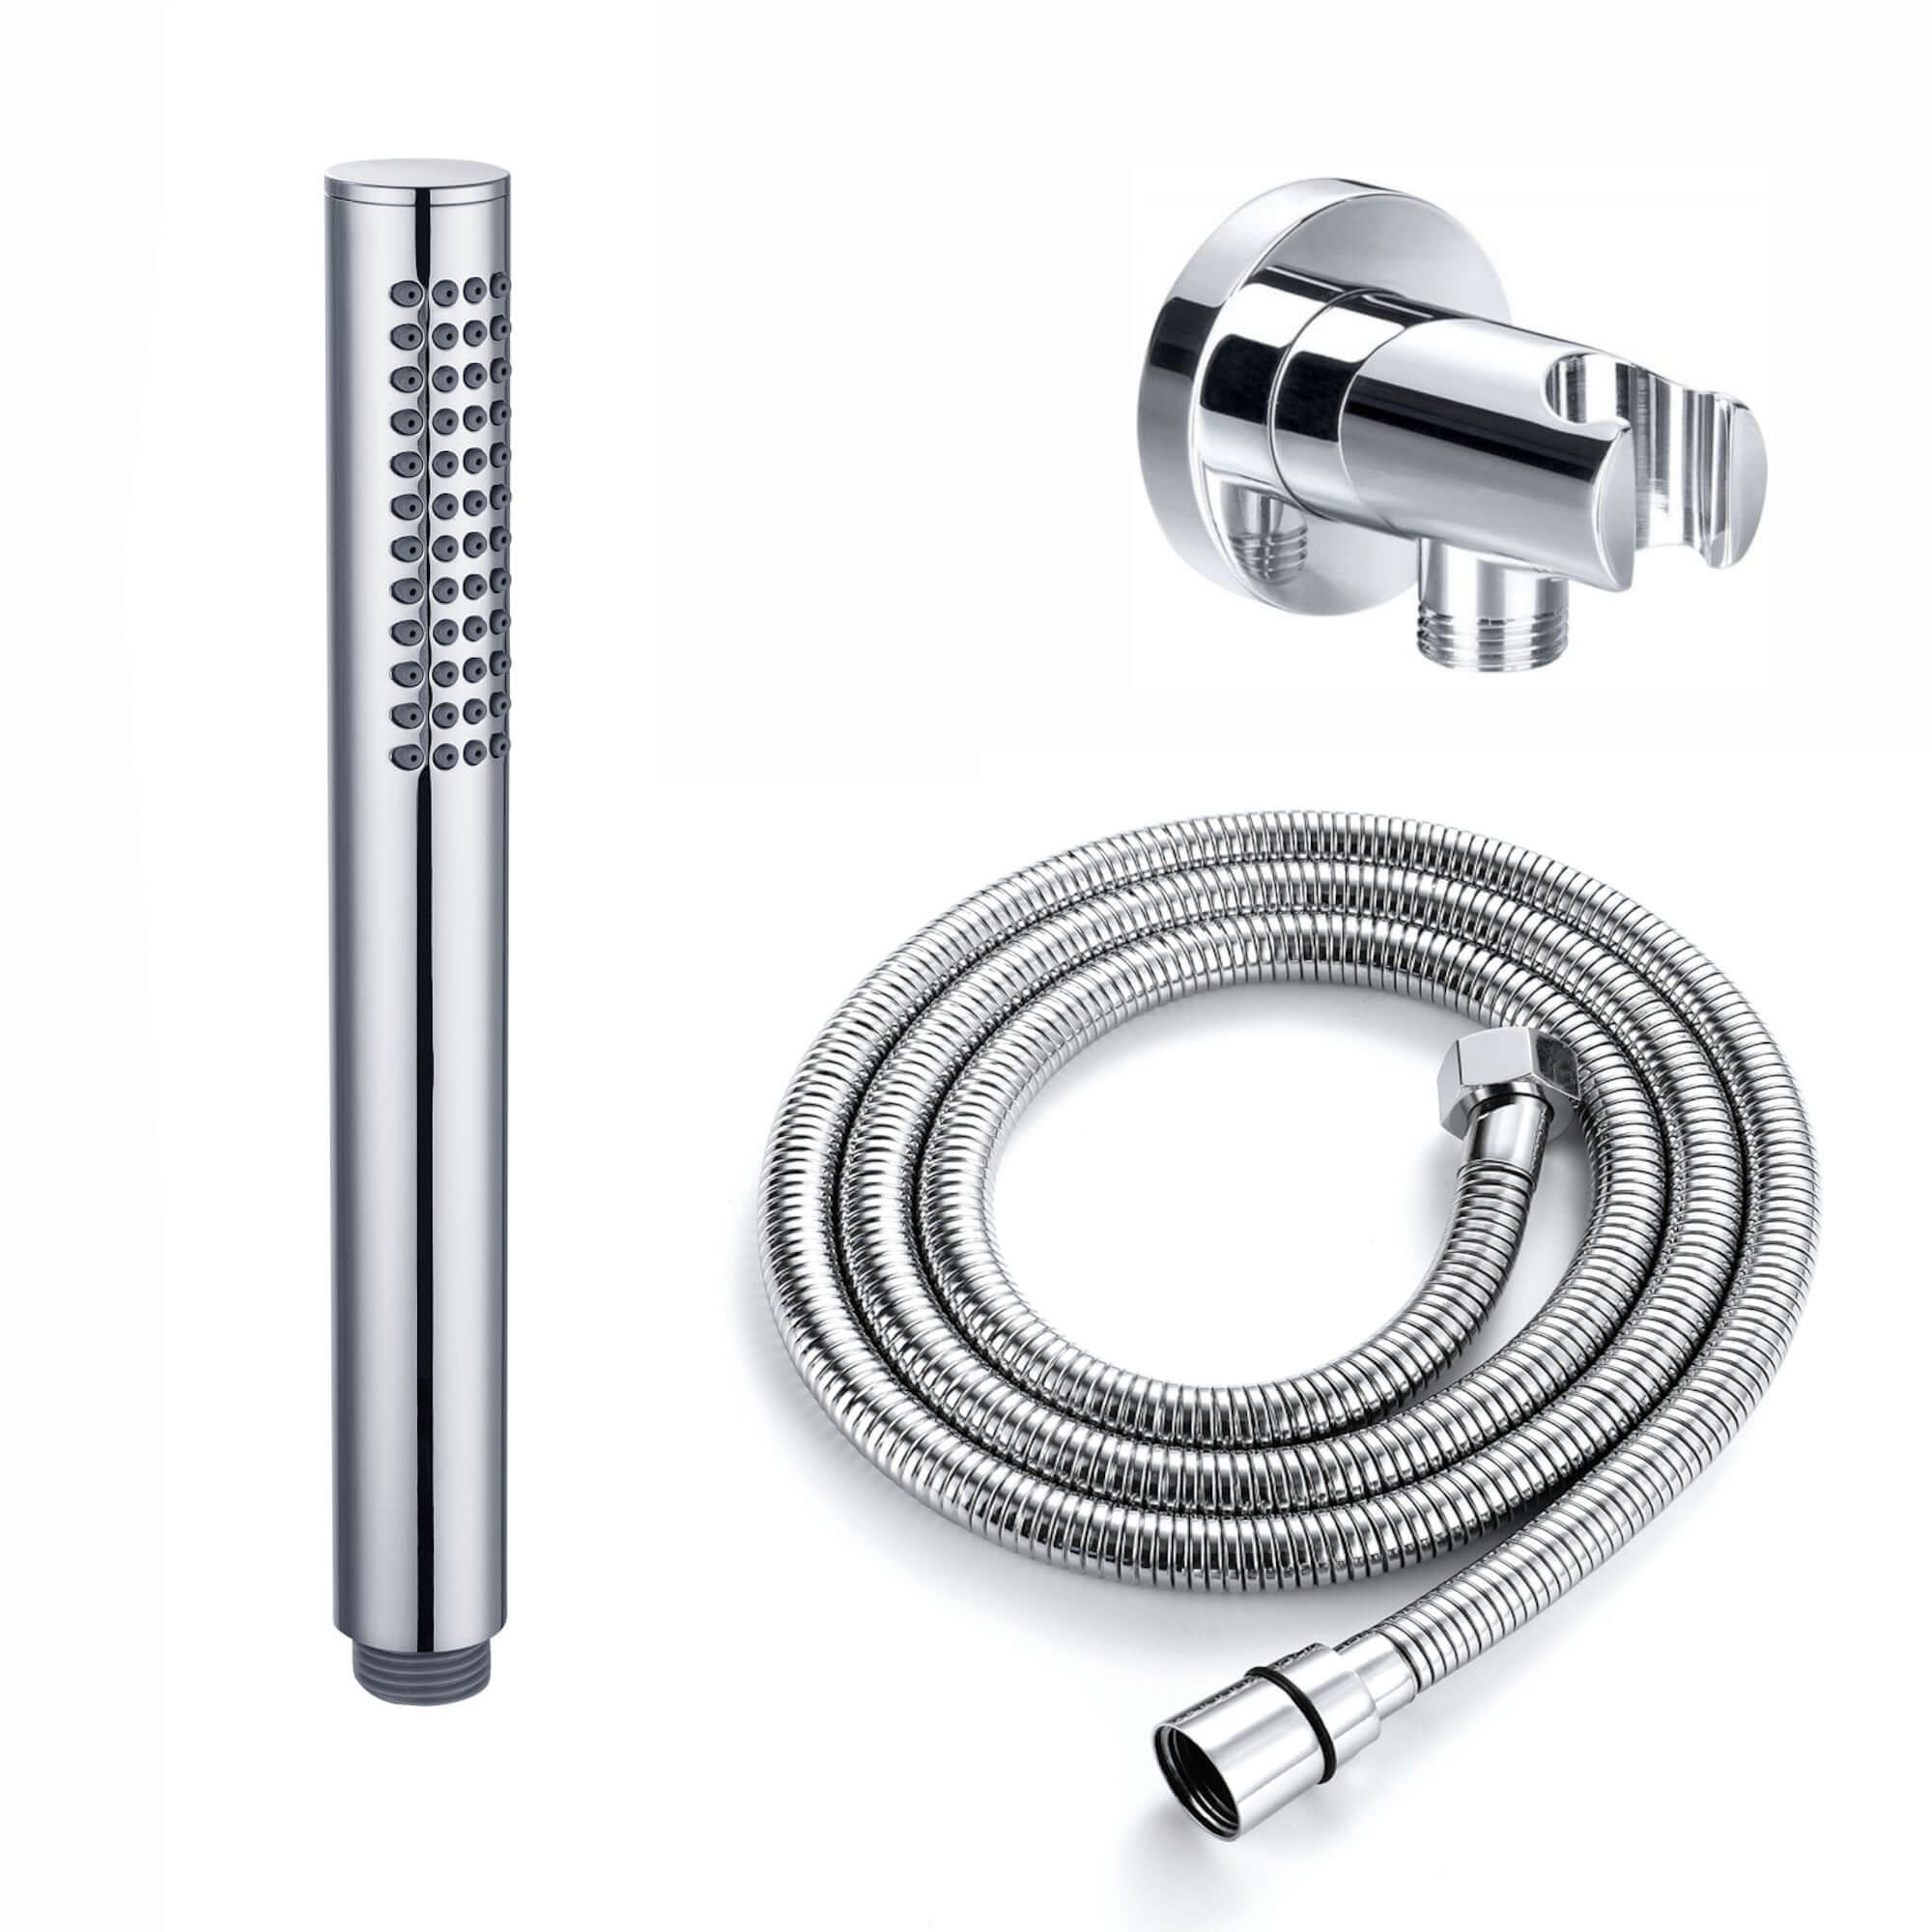 Premium Round Pencil Hand Shower With Silicone Jets Kit Incl. Hose And Wall Bracket With Outlet - Chrome - Showers